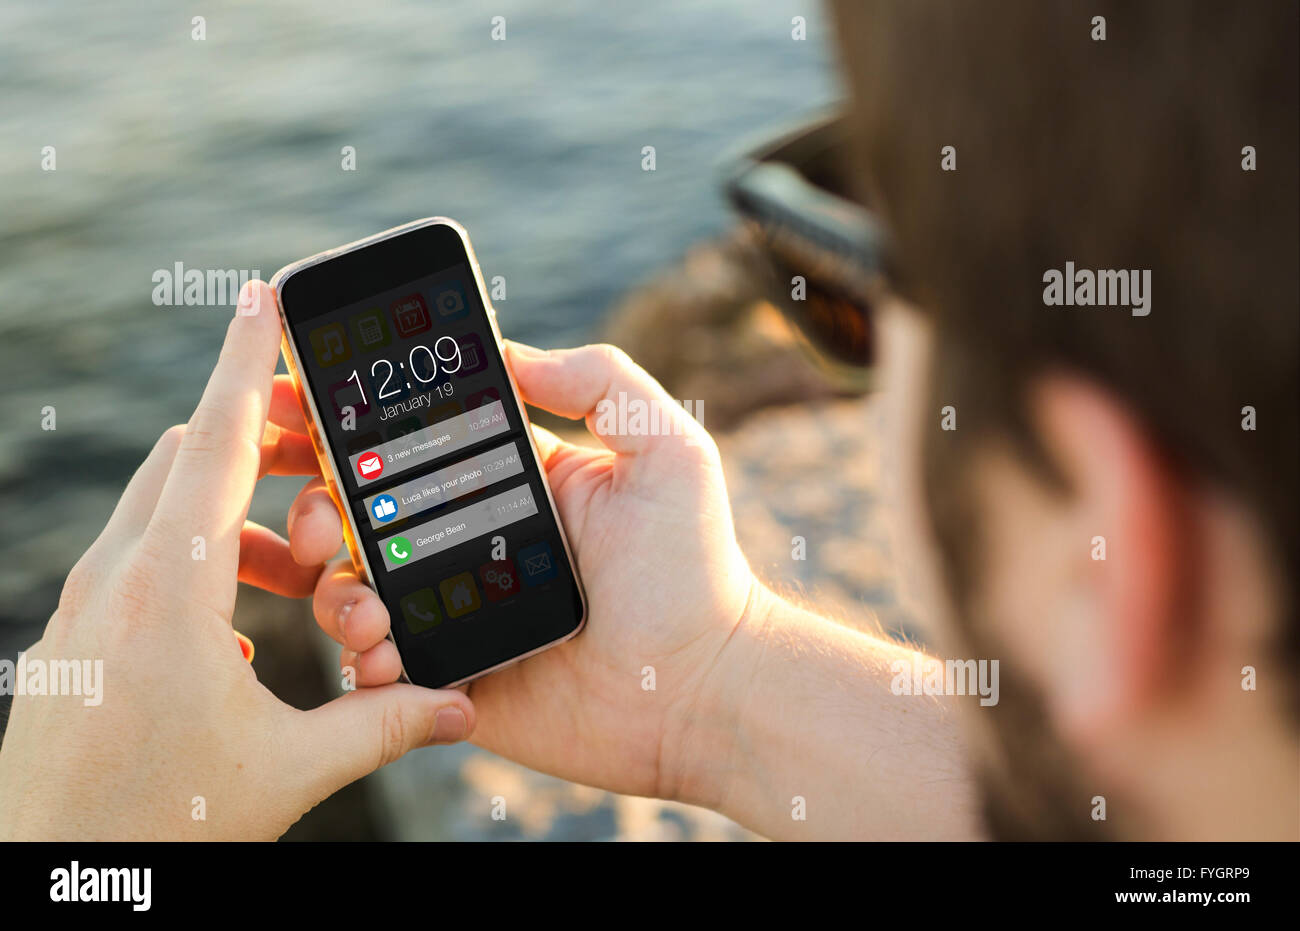 man on the coast looking at notifications on his smartphone. All screen graphics are made up. Stock Photo